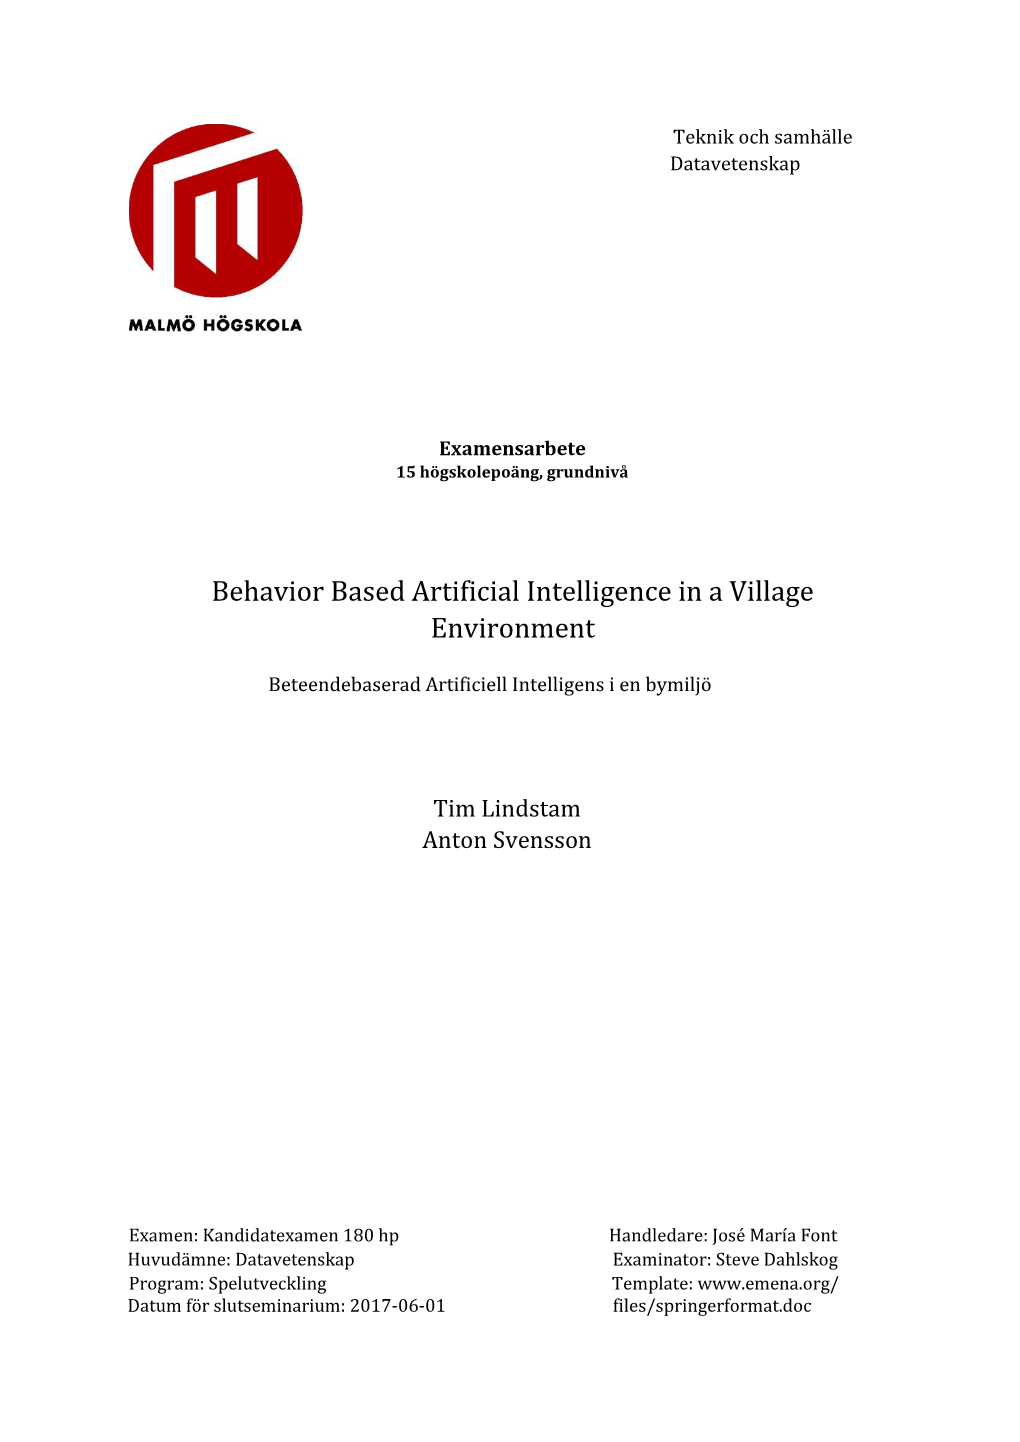 Behavior Based Artificial Intelligence in a Village Environment